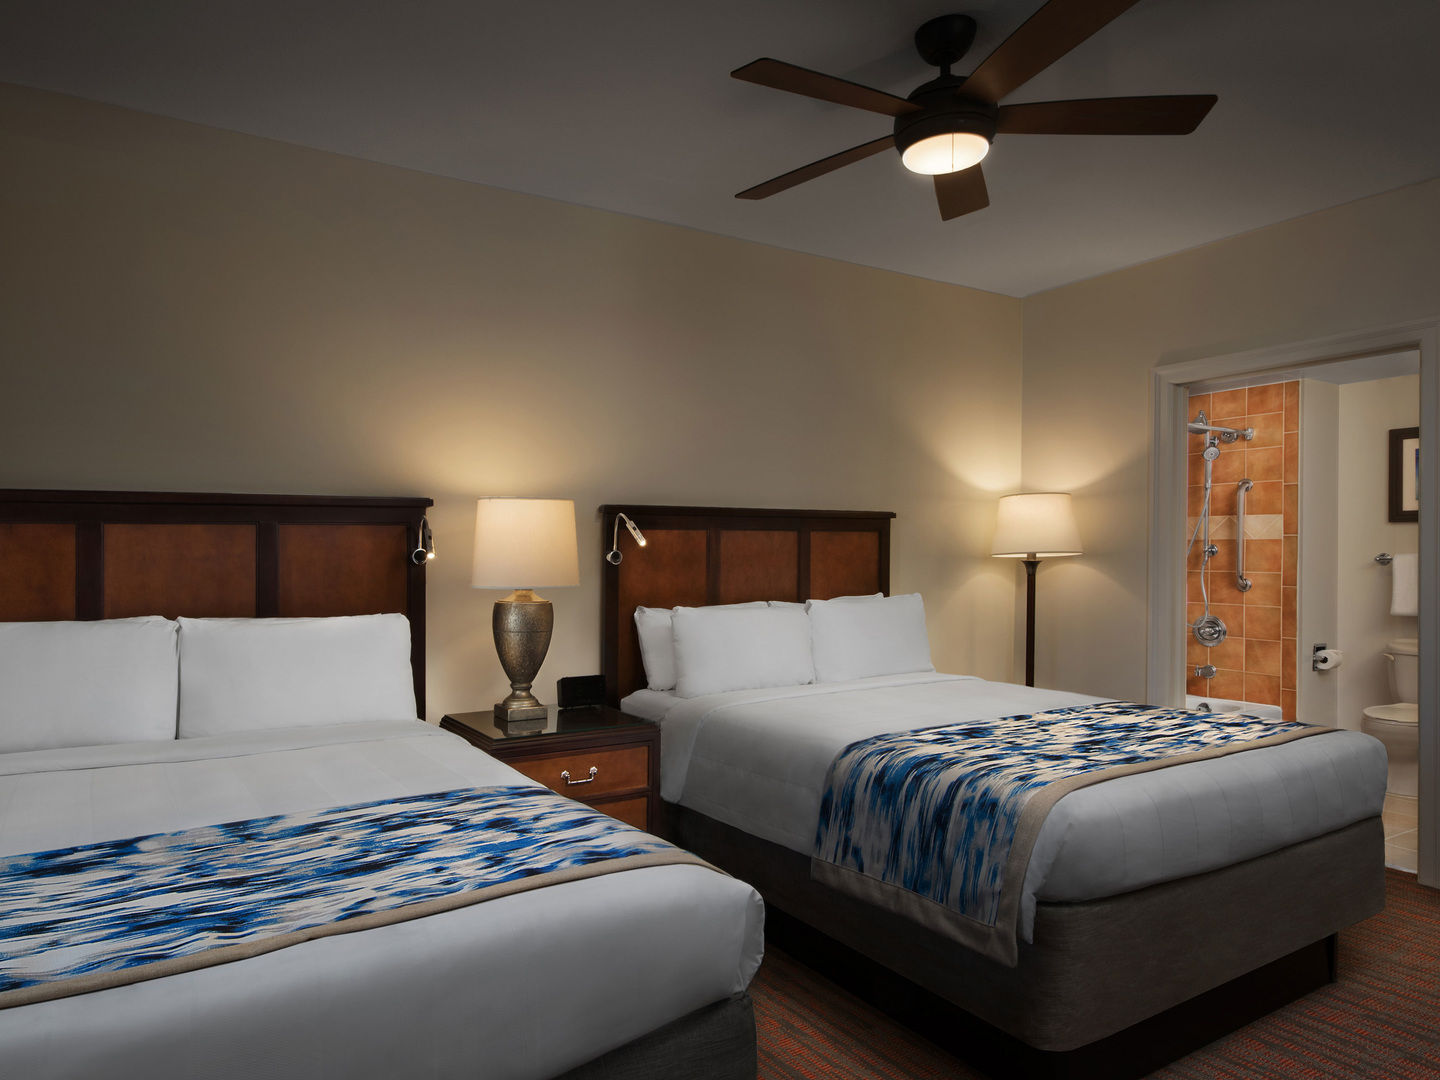 Marriott's SurfWatch<span class='trademark'>®</span> Villa 3rd Bedroom. Marriott's SurfWatch<span class='trademark'>®</span> is located in Hilton Head Island, South Carolina United States.